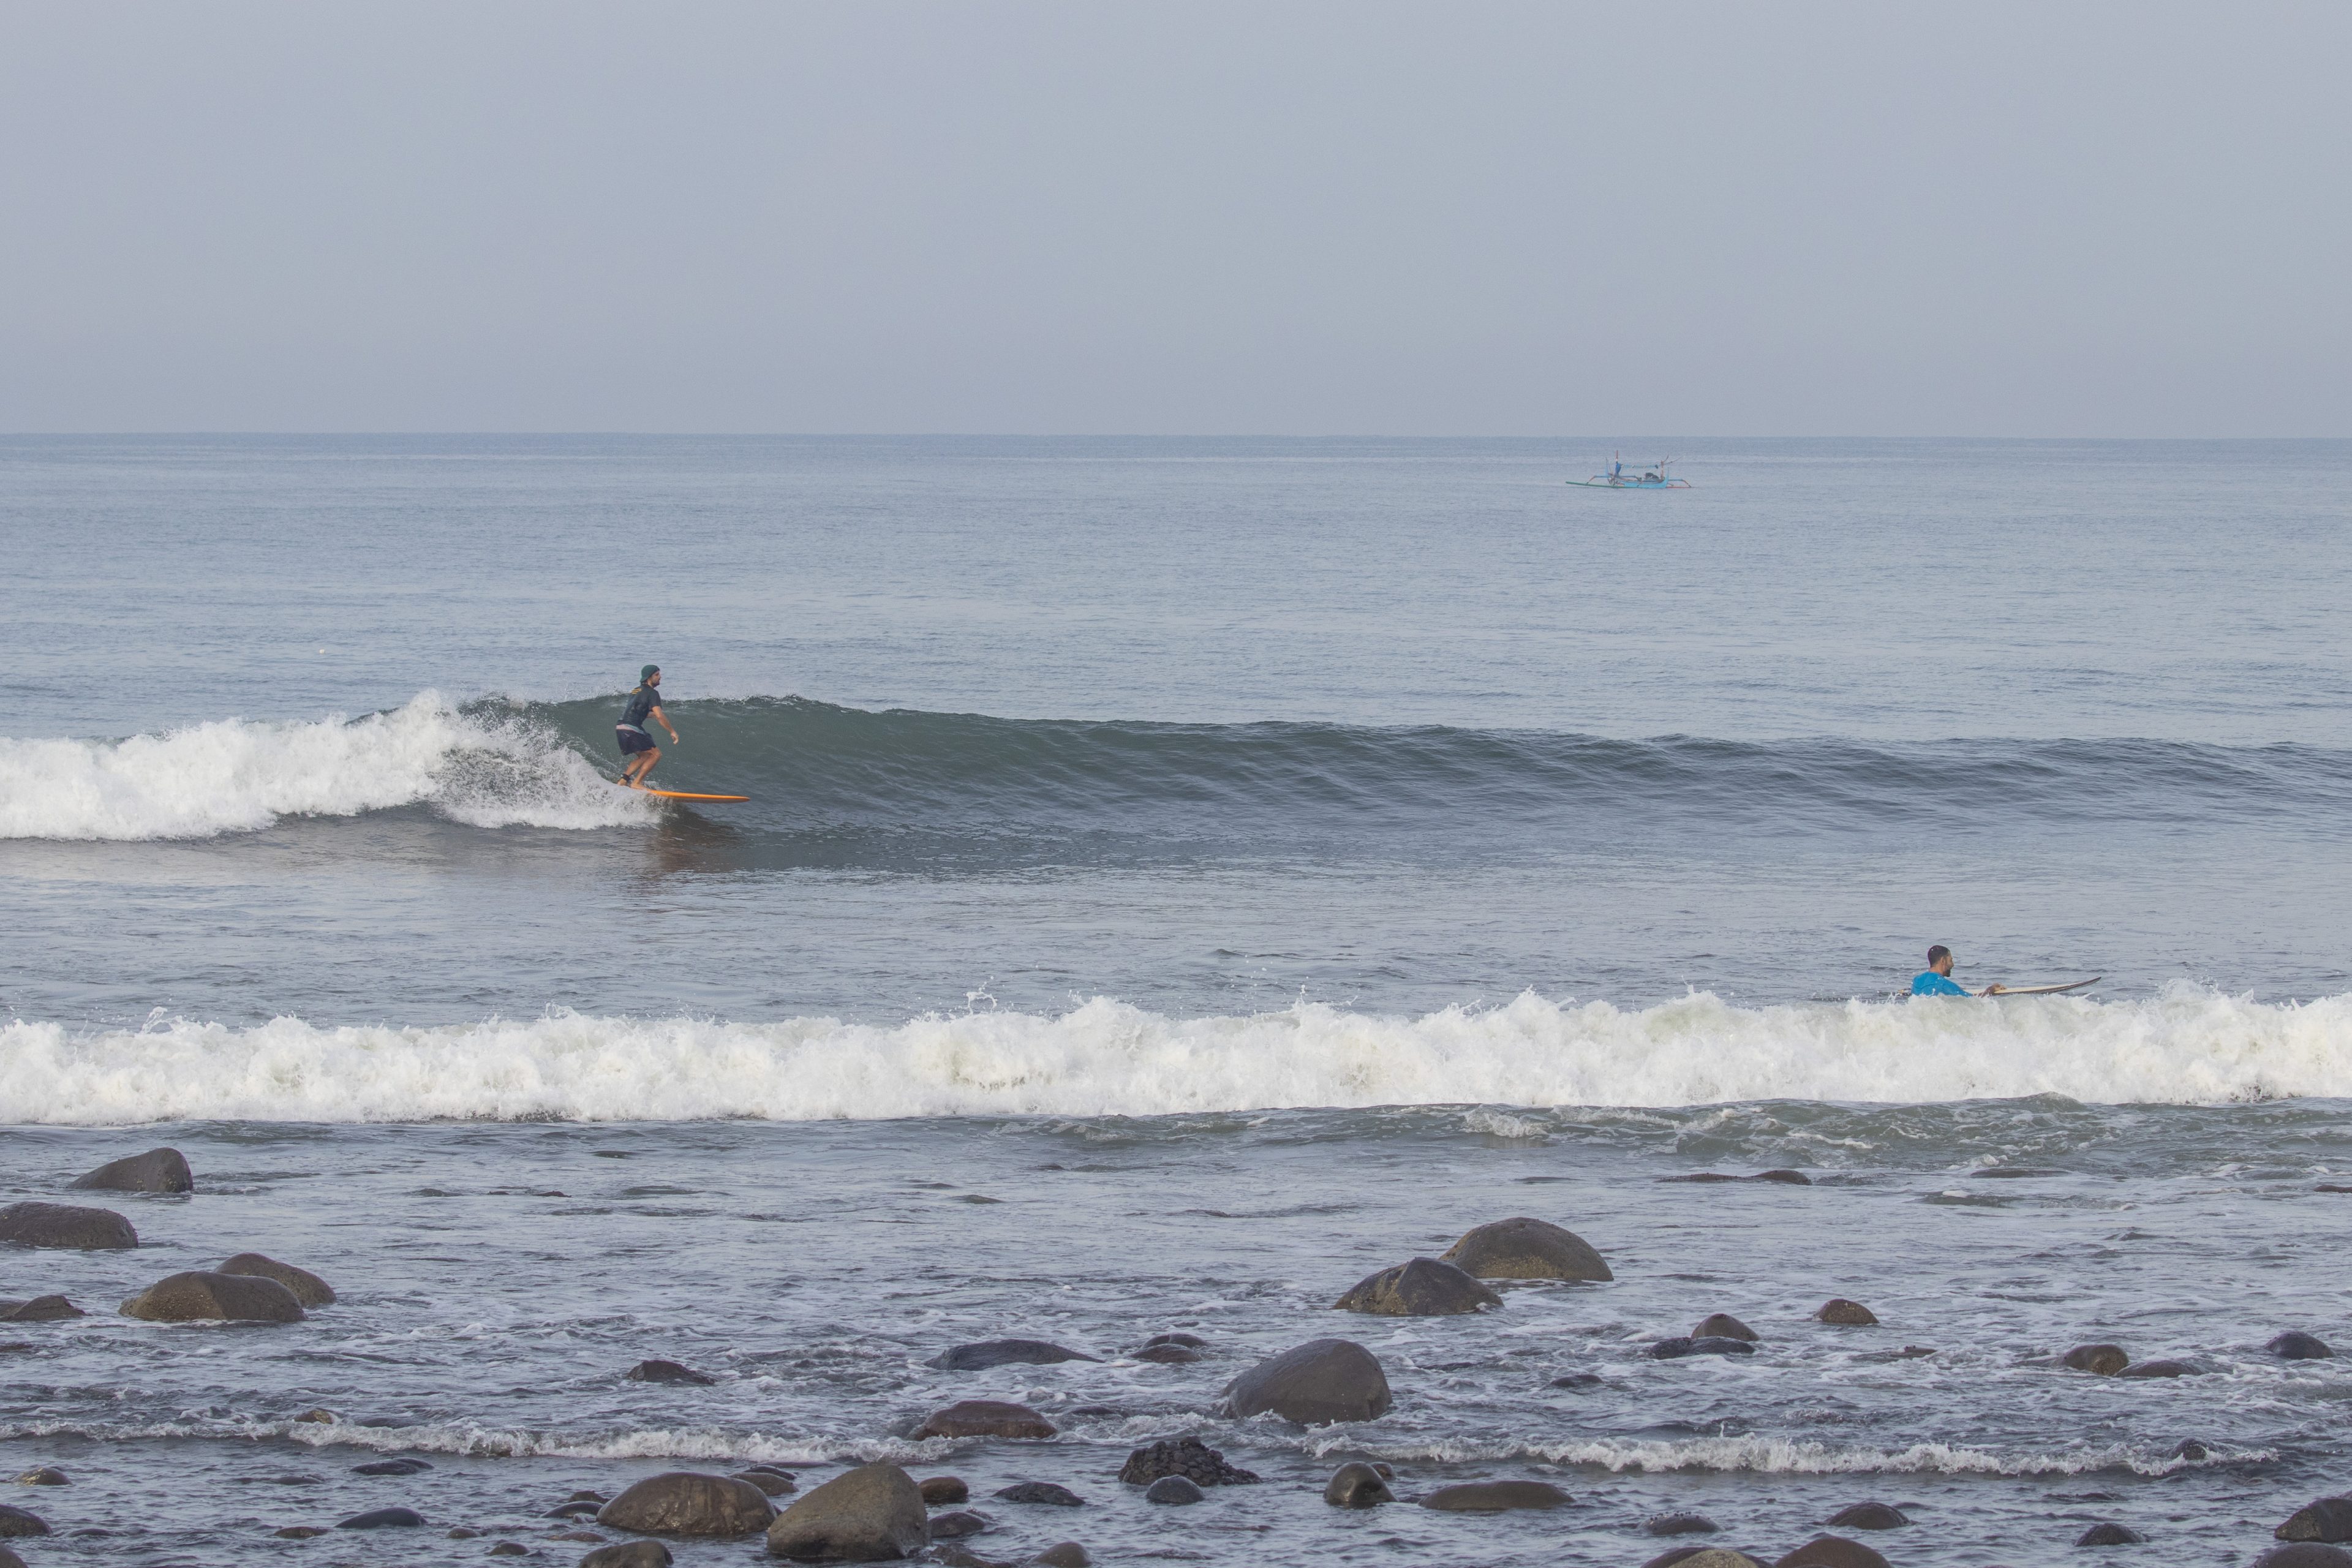 A surfer riding a wave at Medewi.